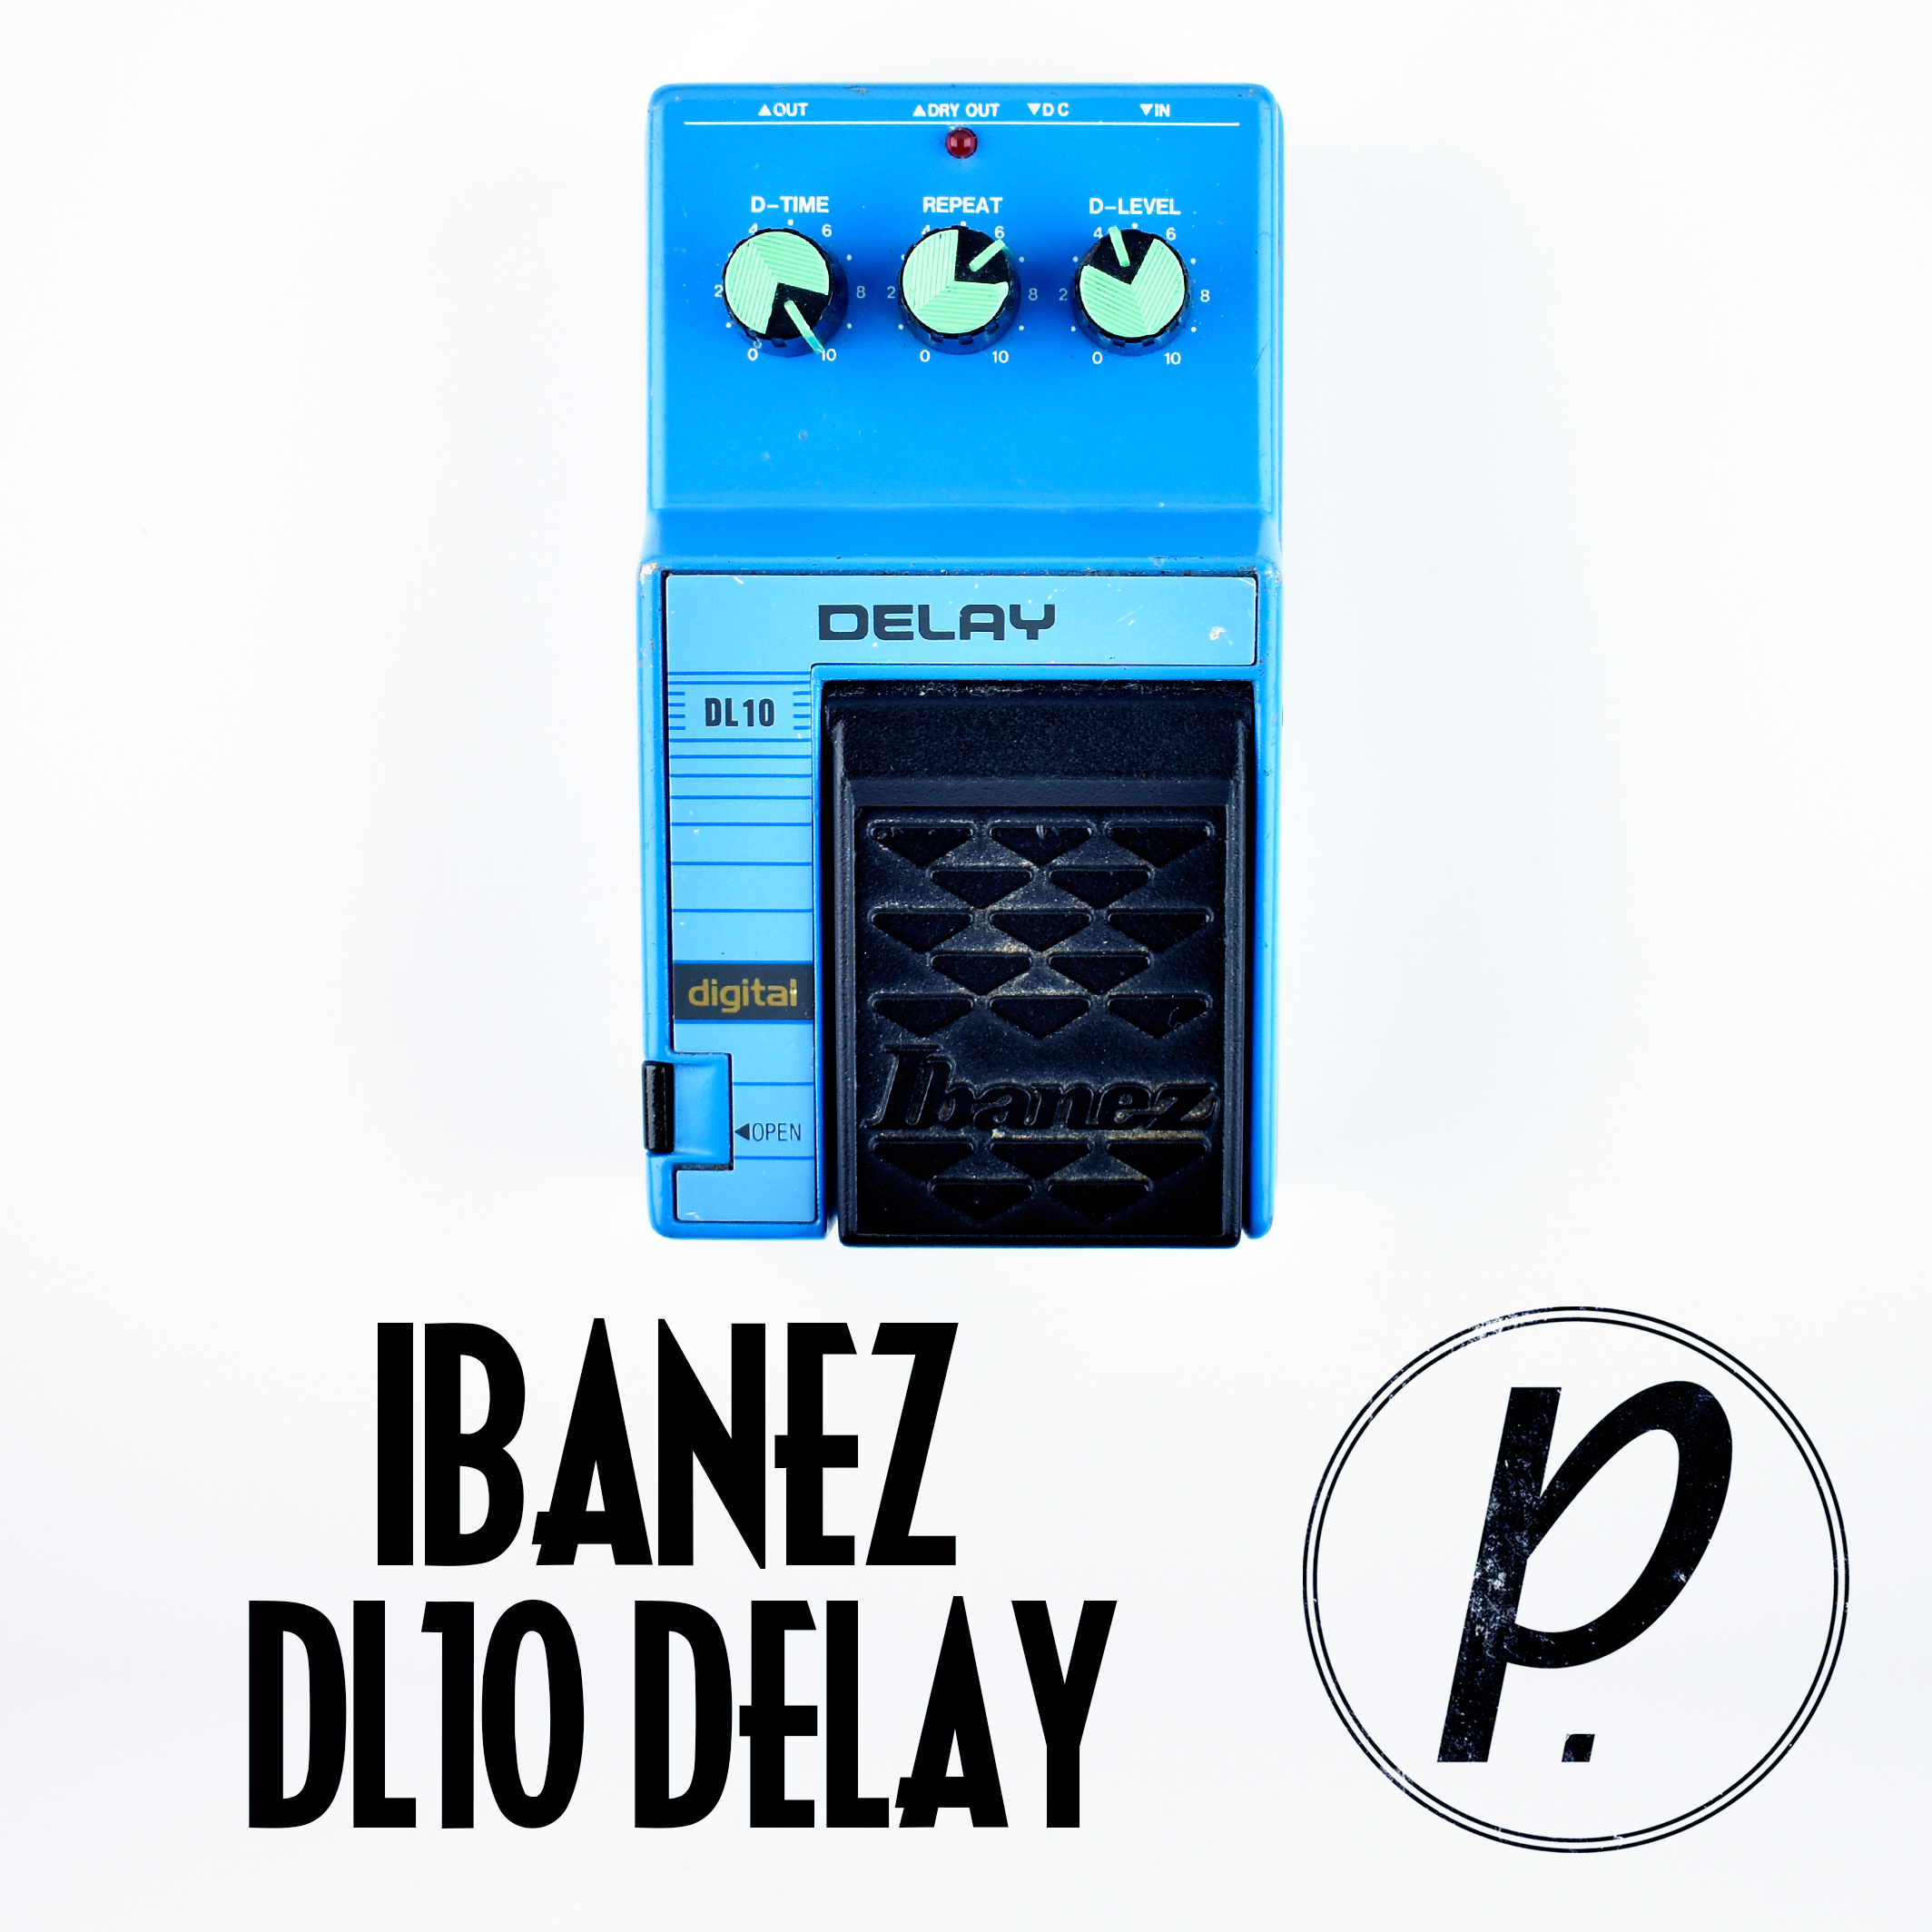 Ibanez DL10 Digital Delay Effects Pedal - Pedal of the Day